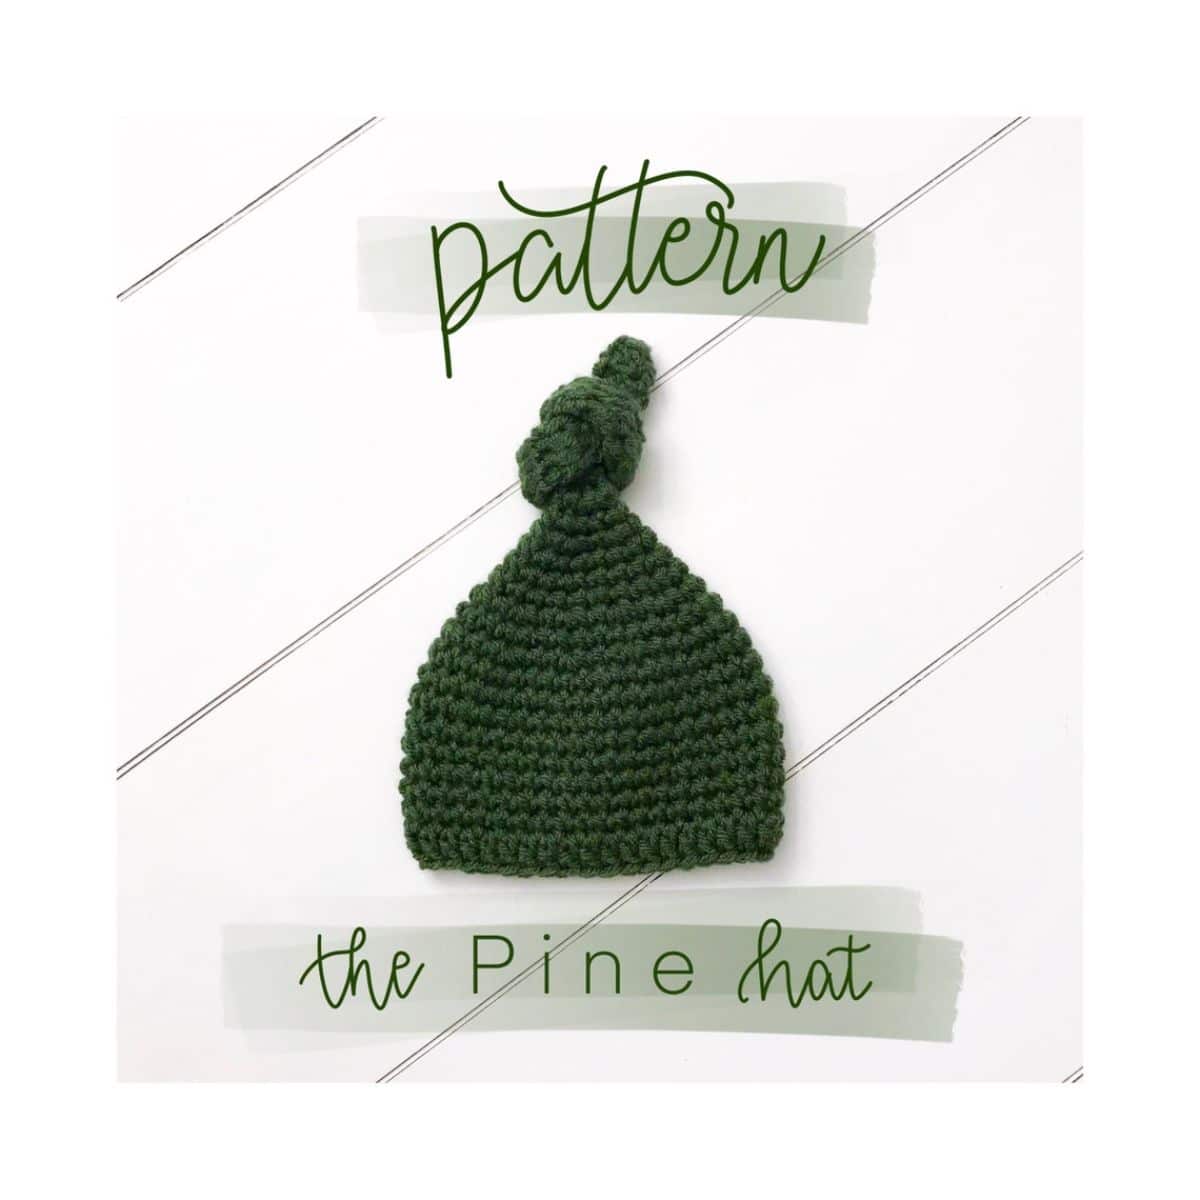 Green crochet beanie with a twisted knot at the top of the hat lying on a white wooden background.